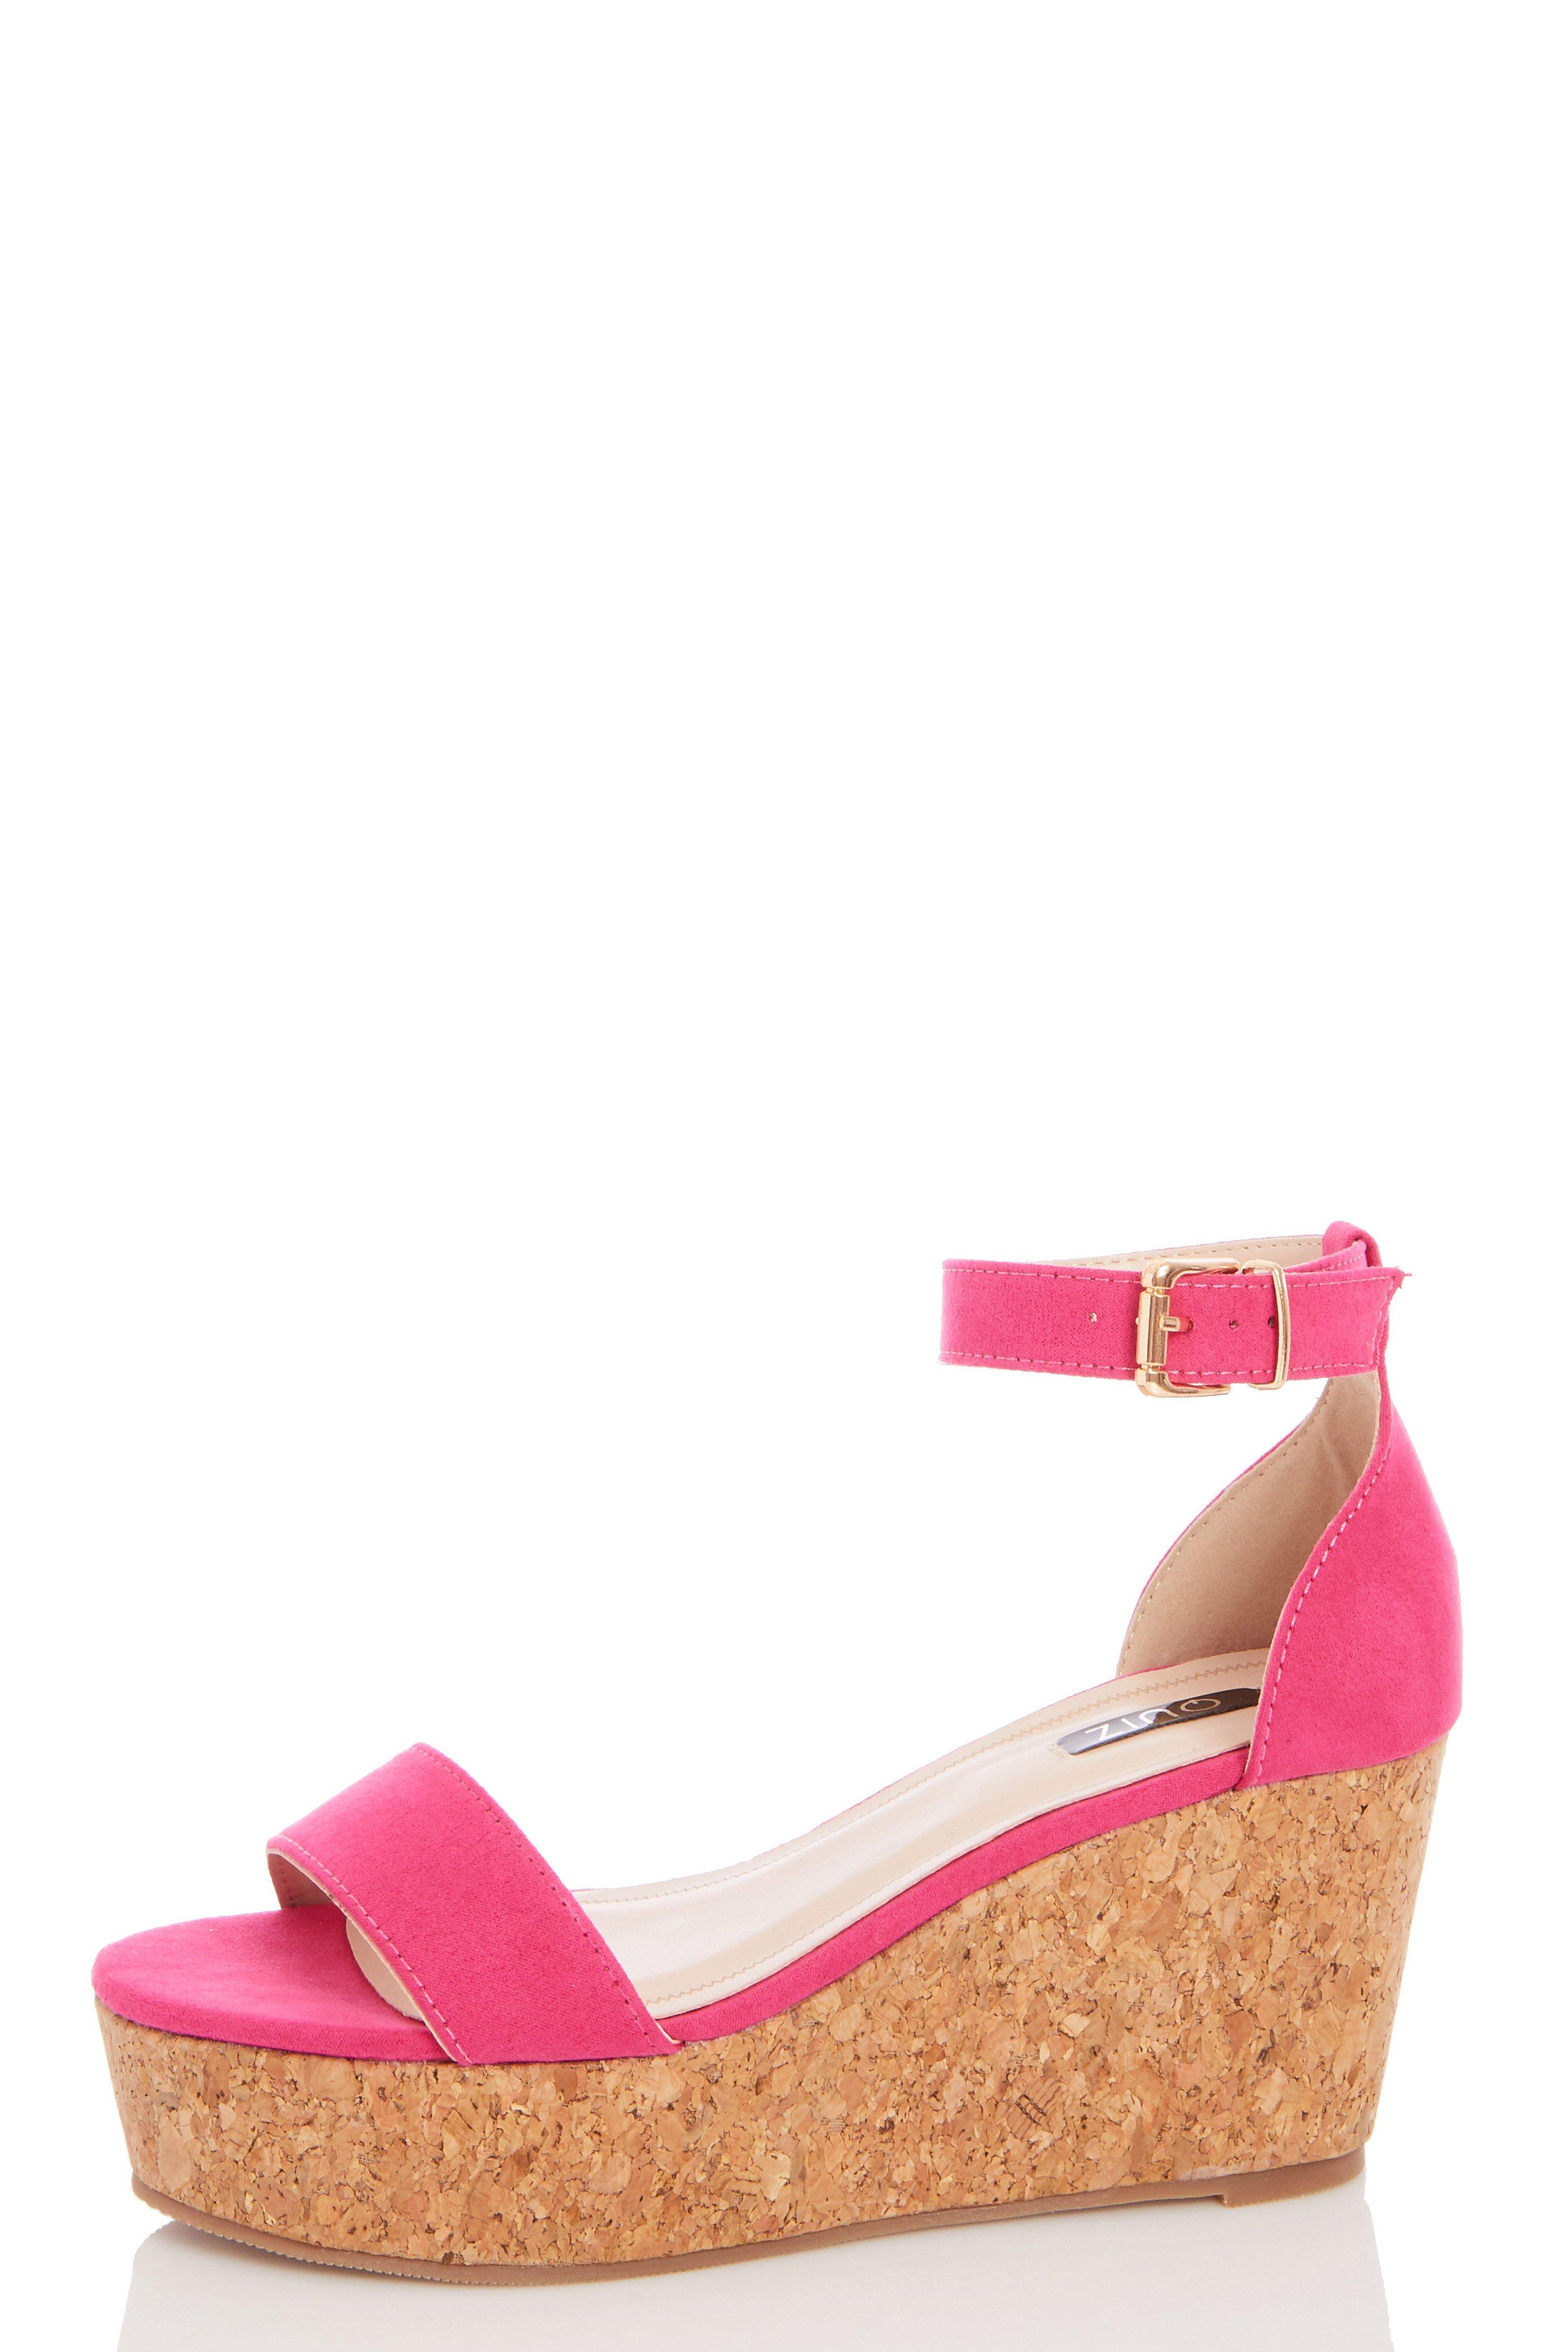 Pink Faux Suede Wedges - Quiz Clothing